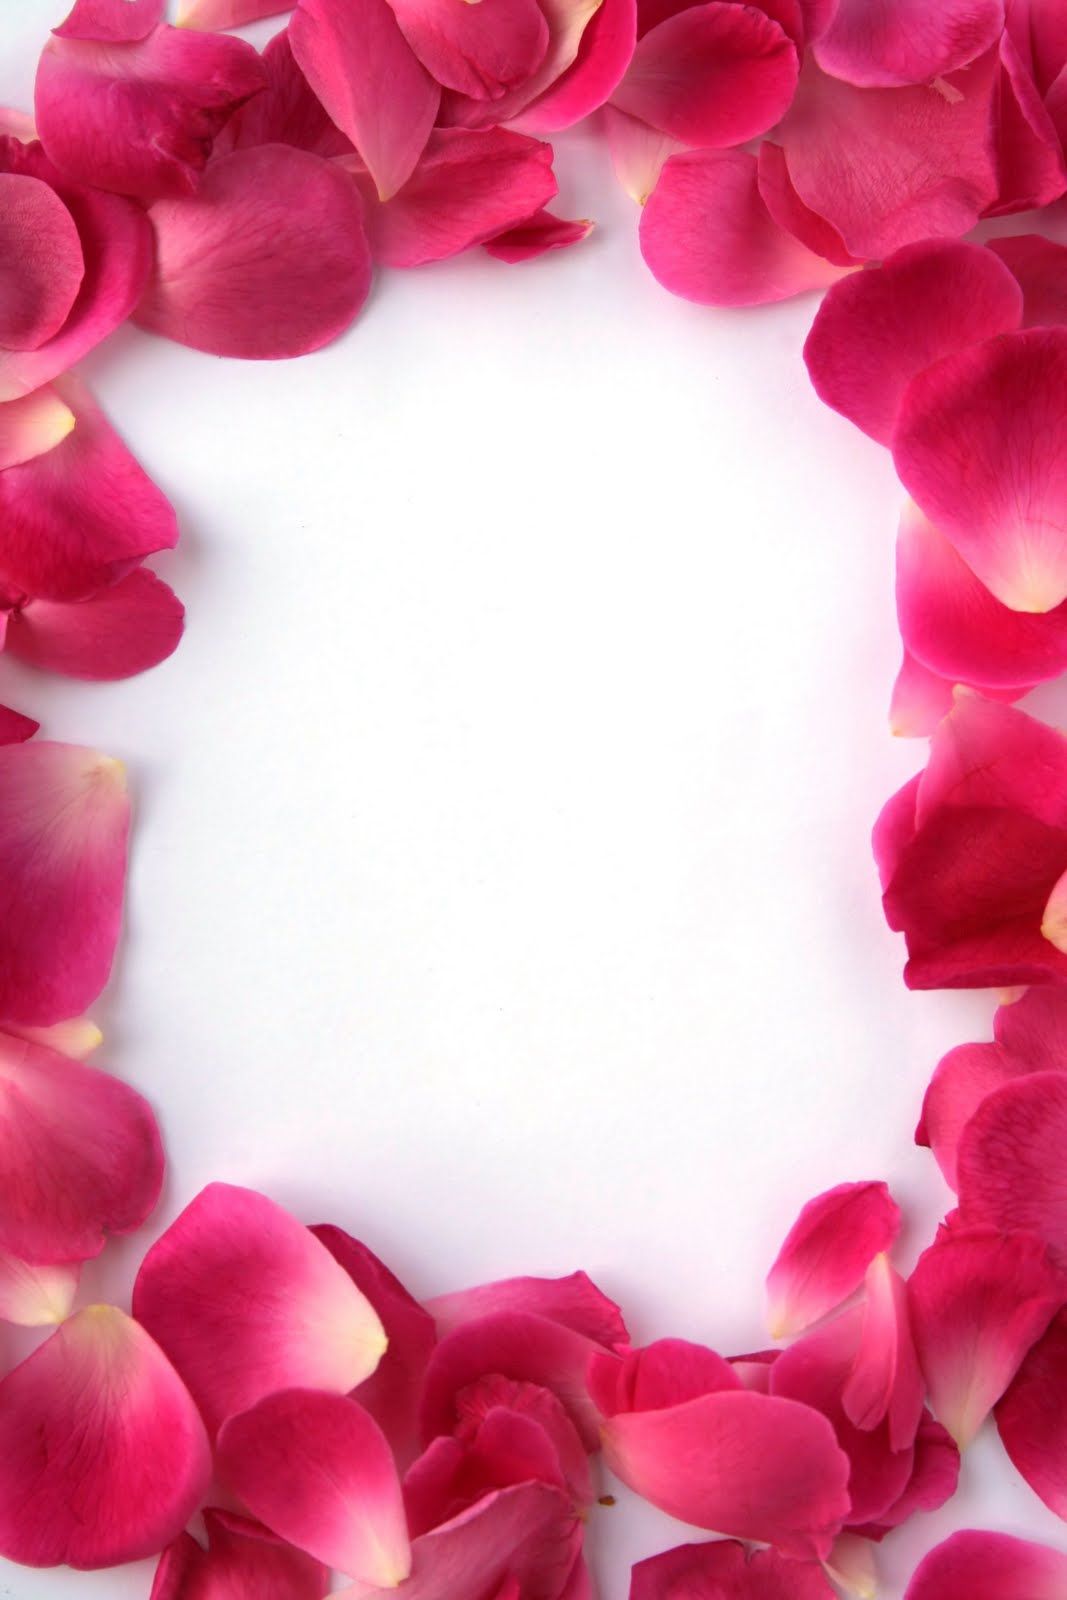 Free download wallpaper image background frames photo picture Flowers frames [1067x1600] for your Desktop, Mobile & Tablet. Explore Picture Frame Background. Picture Frame Wallpaper, Picture Frame Background, Blank Picture Frame Wallpaper